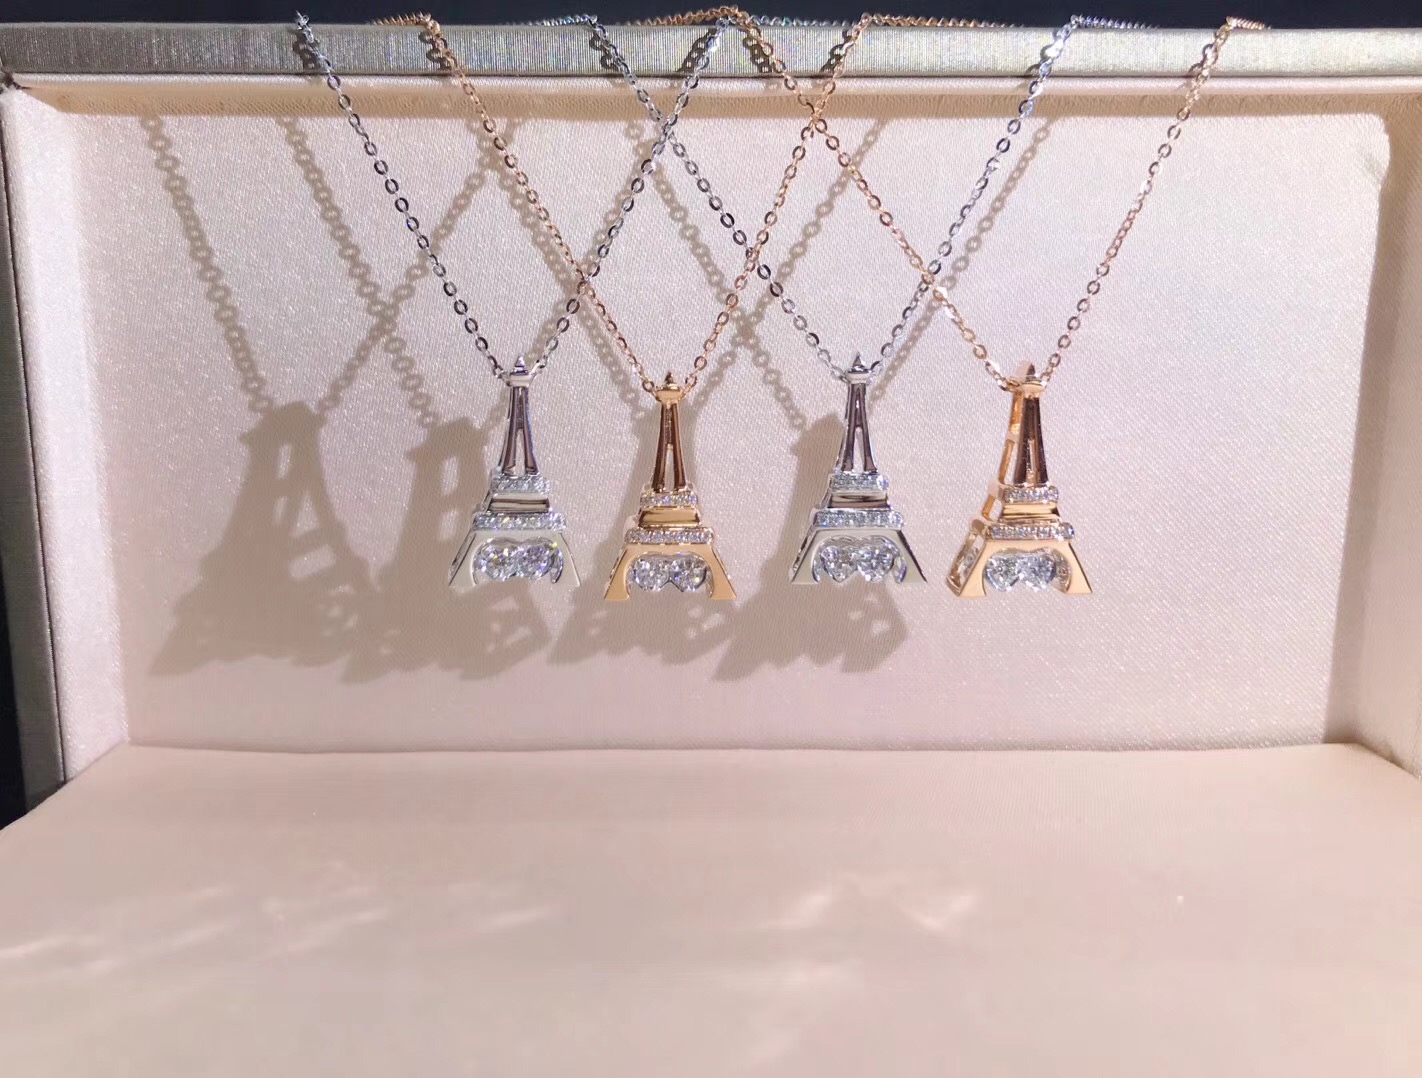 A00007 Eiffel Tower Diamond Necklace in 18k White Gold/18k Rose Gold